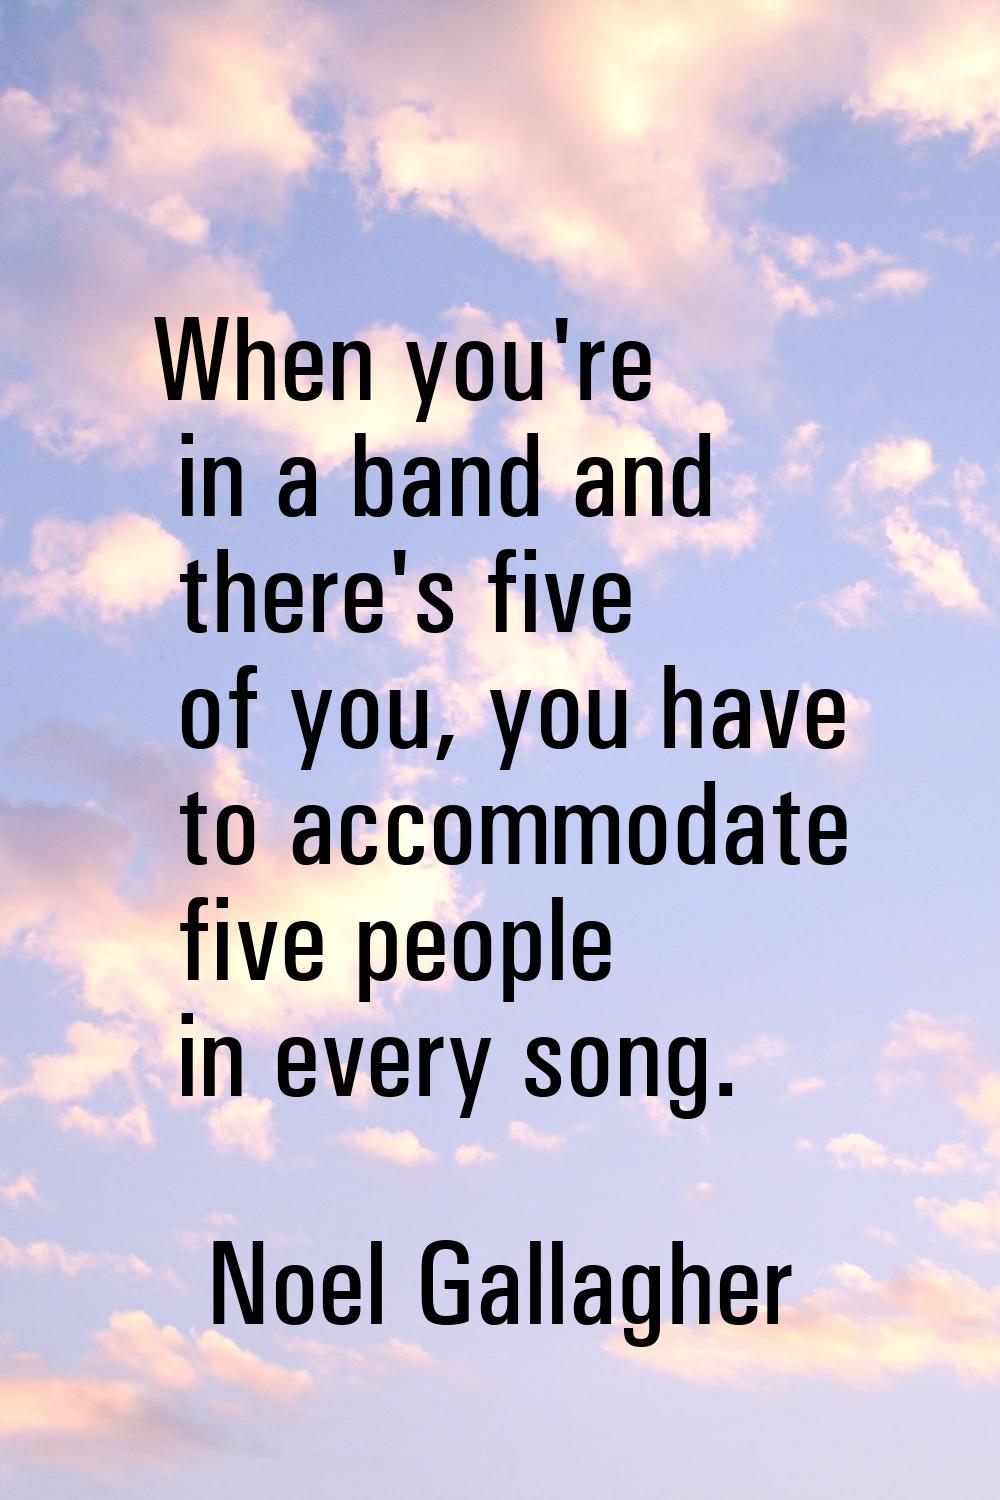 When you're in a band and there's five of you, you have to accommodate five people in every song.